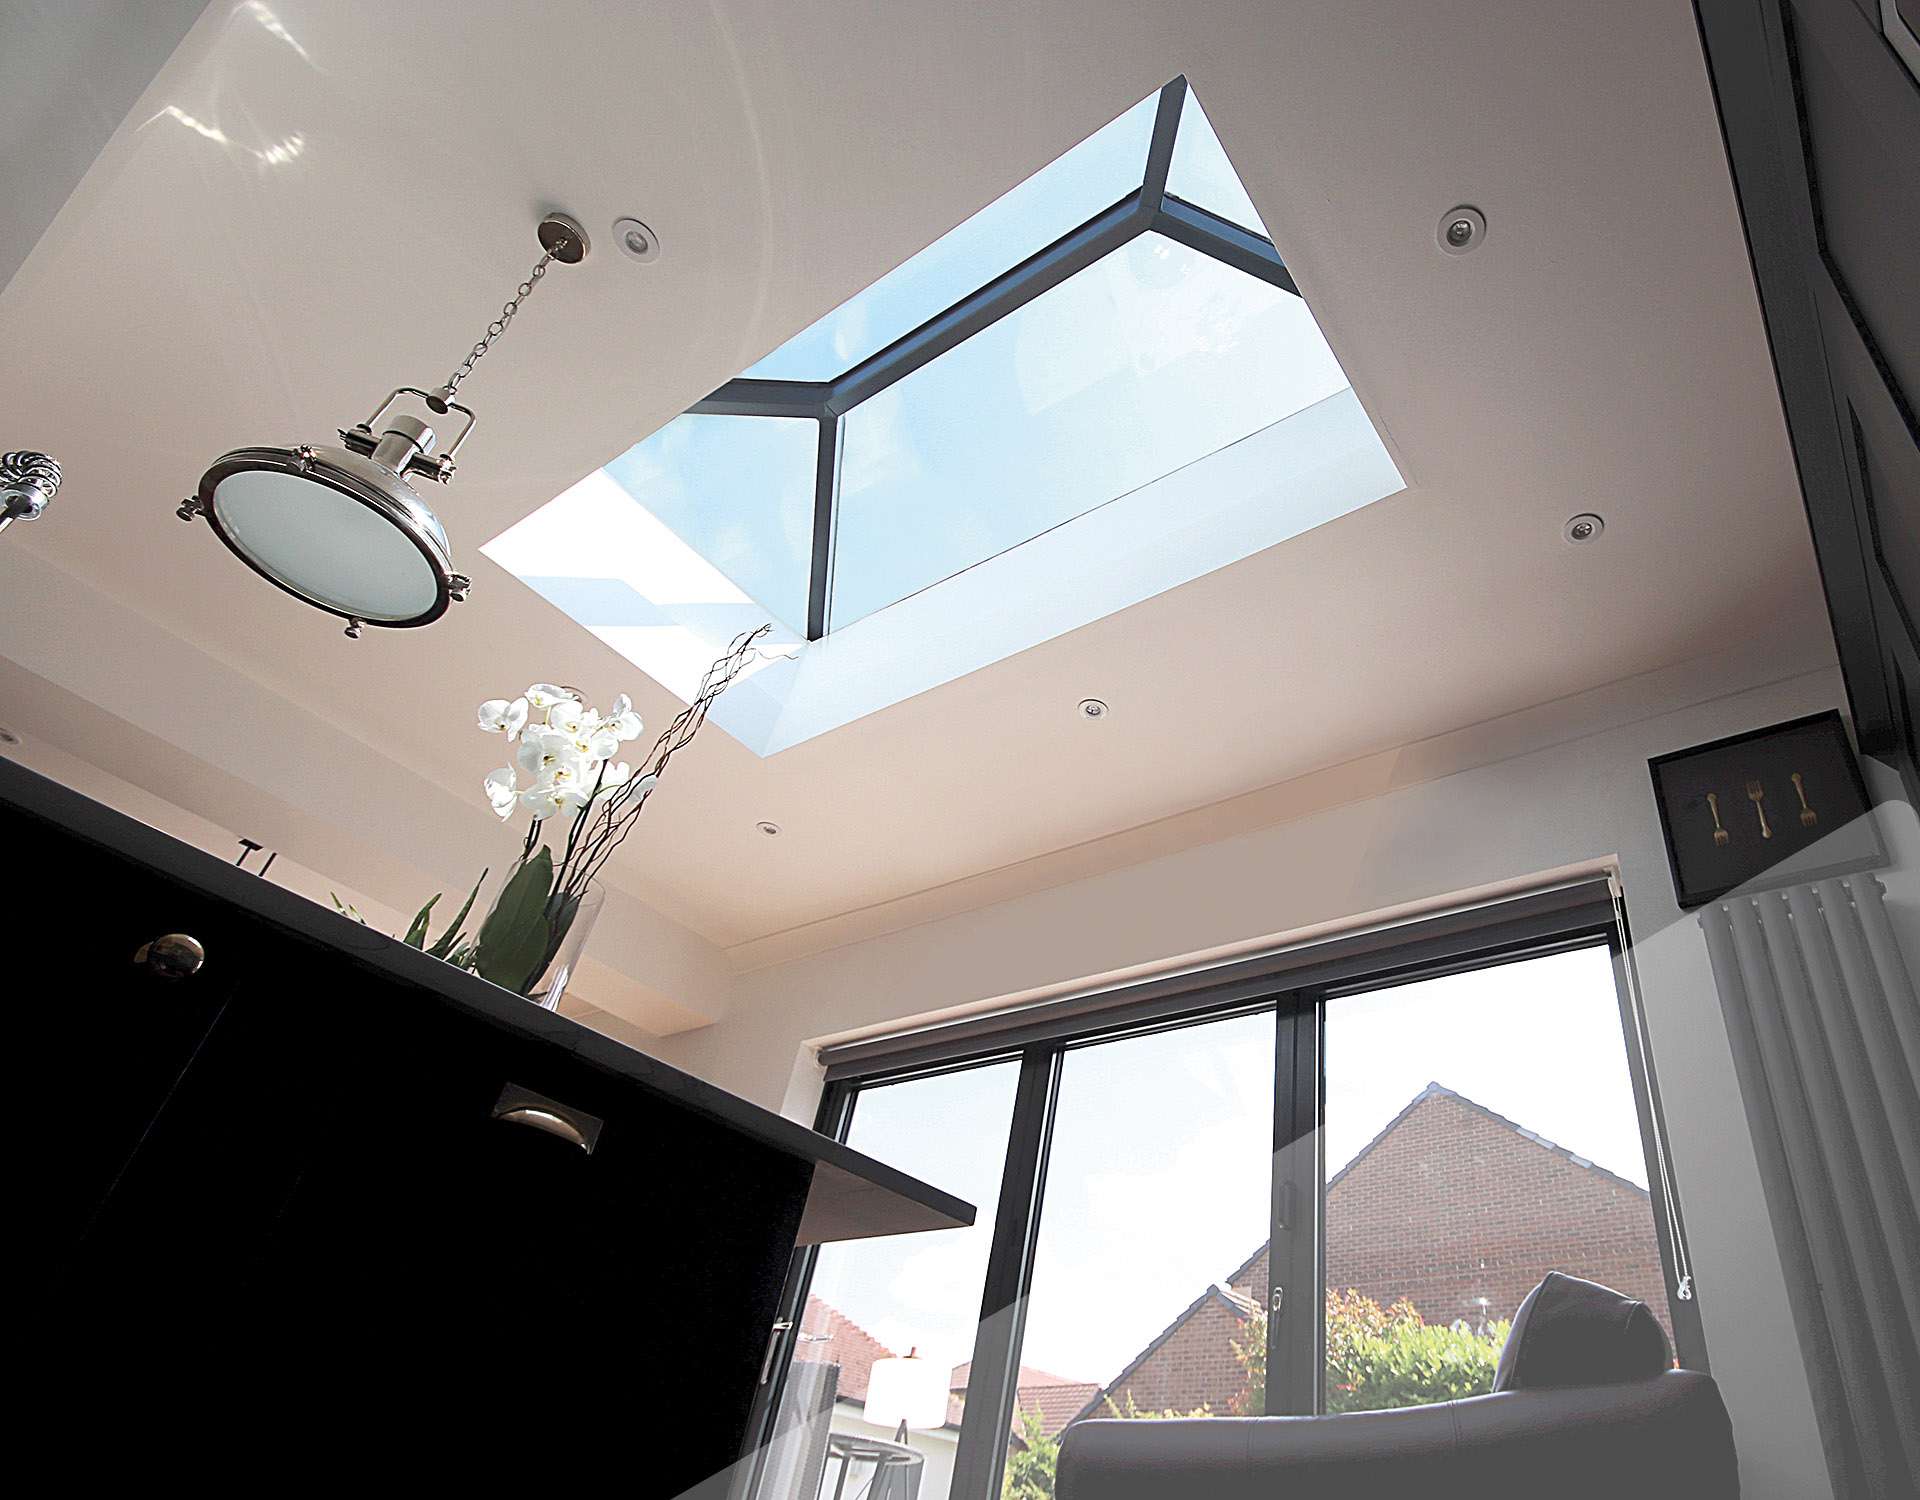 A worms eye view of a black Korniche roof lantern in a modern kitchen furnished with black counter tops a brown sofa chair and dark grey radiator. A rustic styled light hangs from the ceiling.